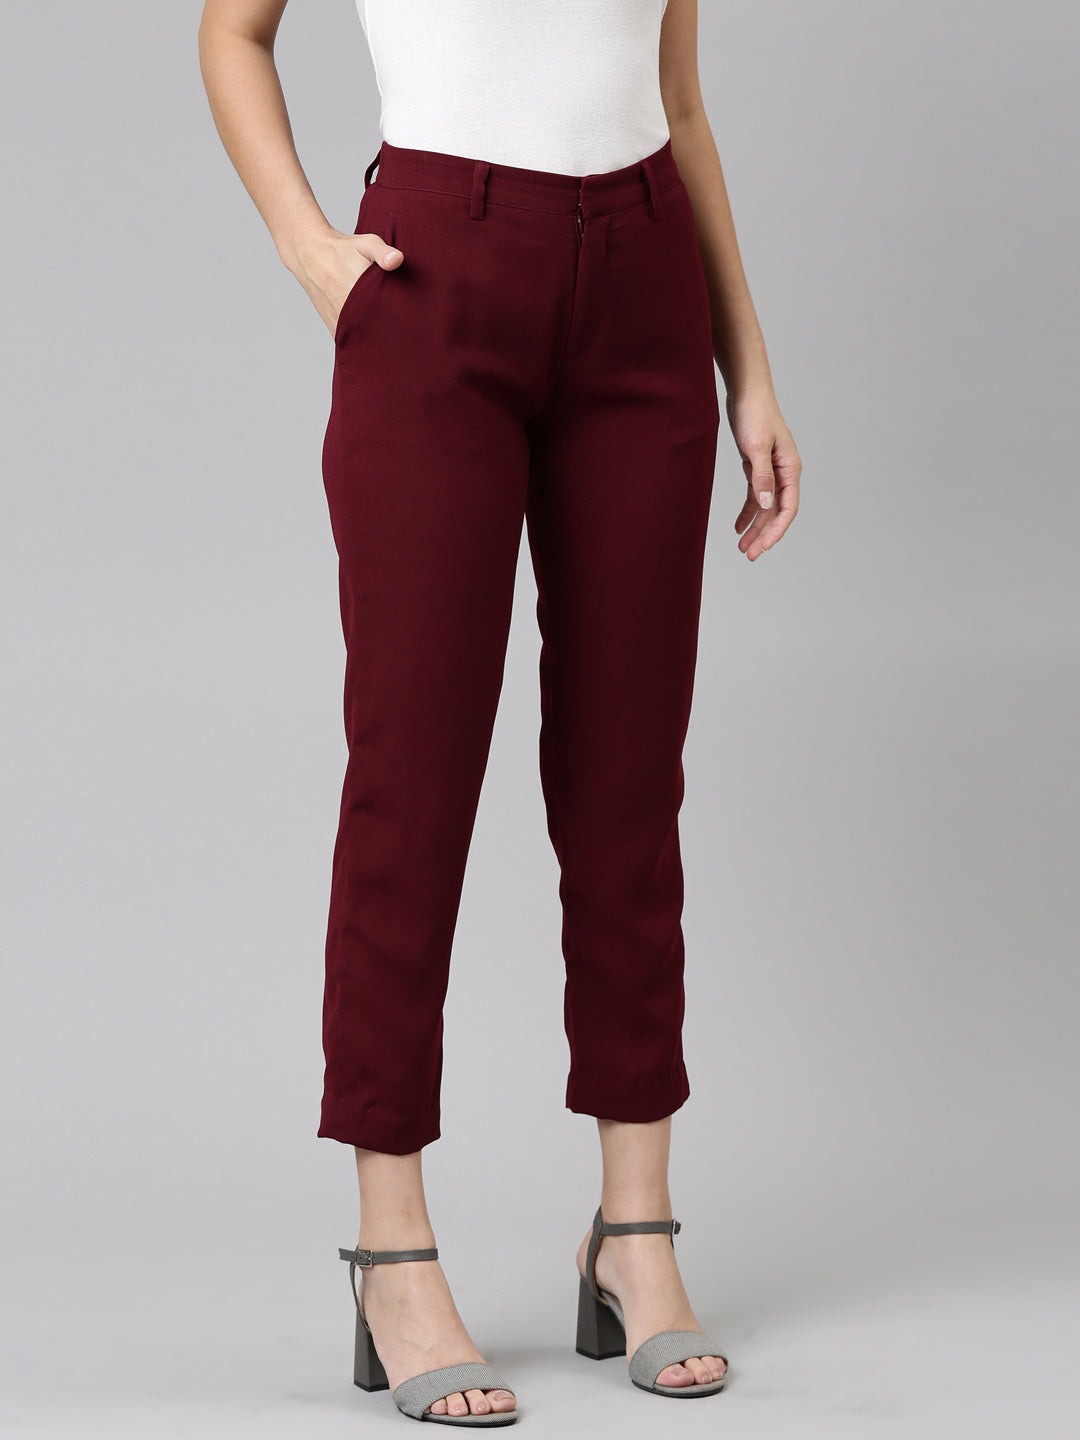 Buy Women Pink Regular Fit Solid Business Casual Trousers Online  470990   Allen Solly